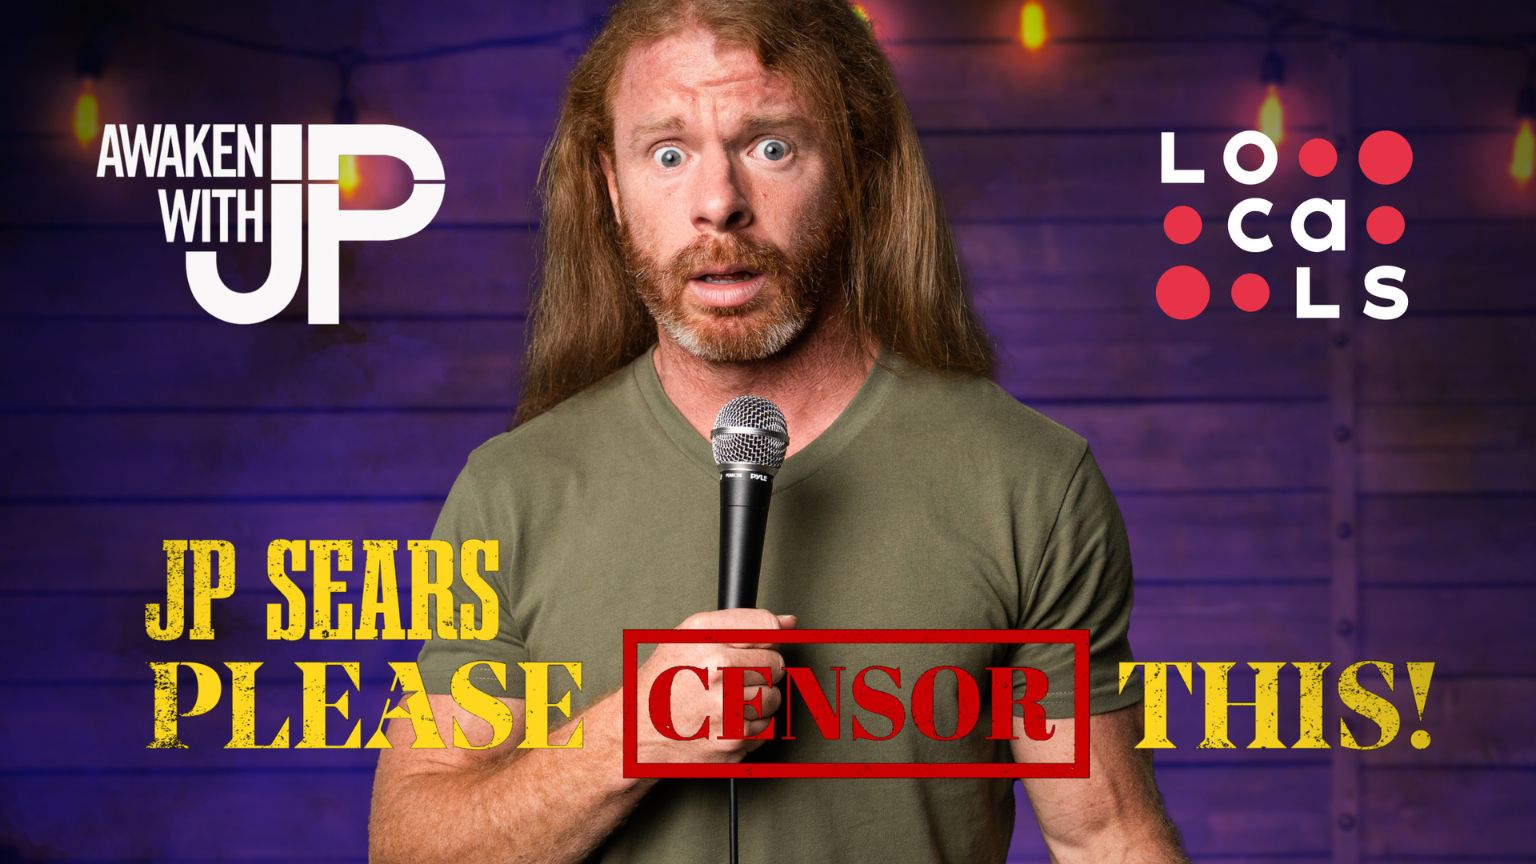 Comedian JP Sears embraces alternative tech platform Locals to launch exclusive new special